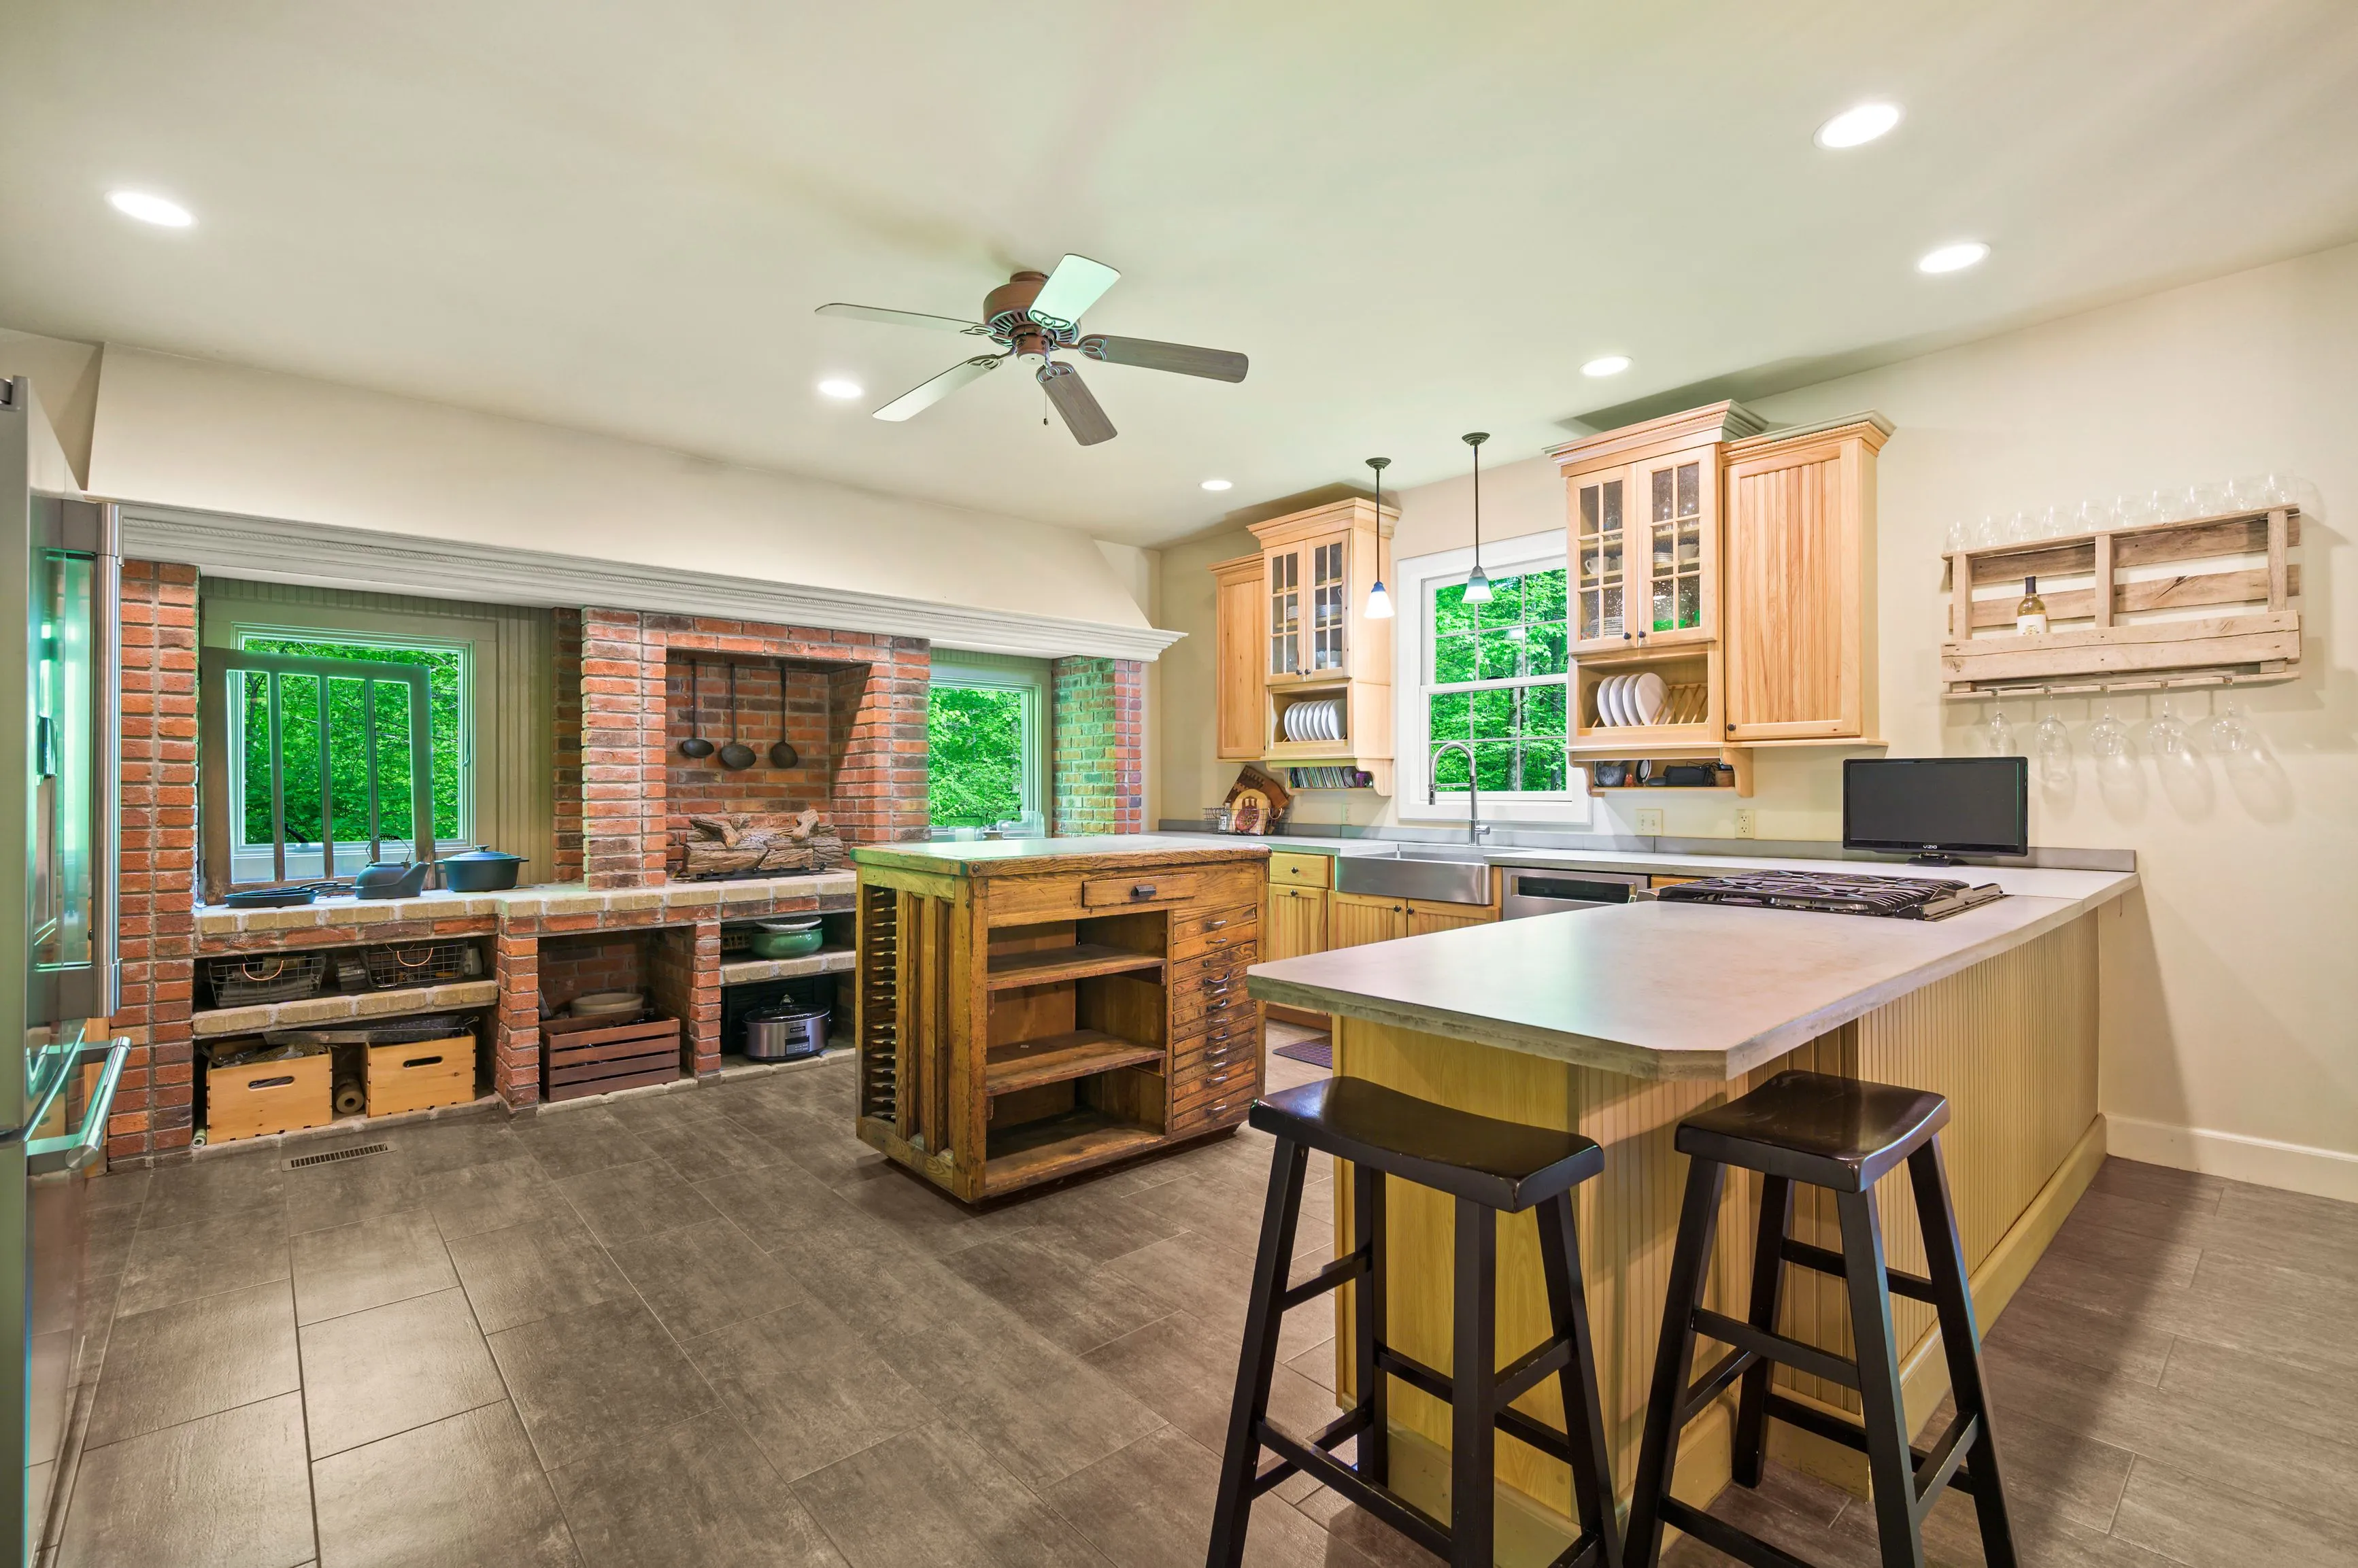 Modern kitchen interior with a brick wall, stainless steel appliances, and a central island with stools.